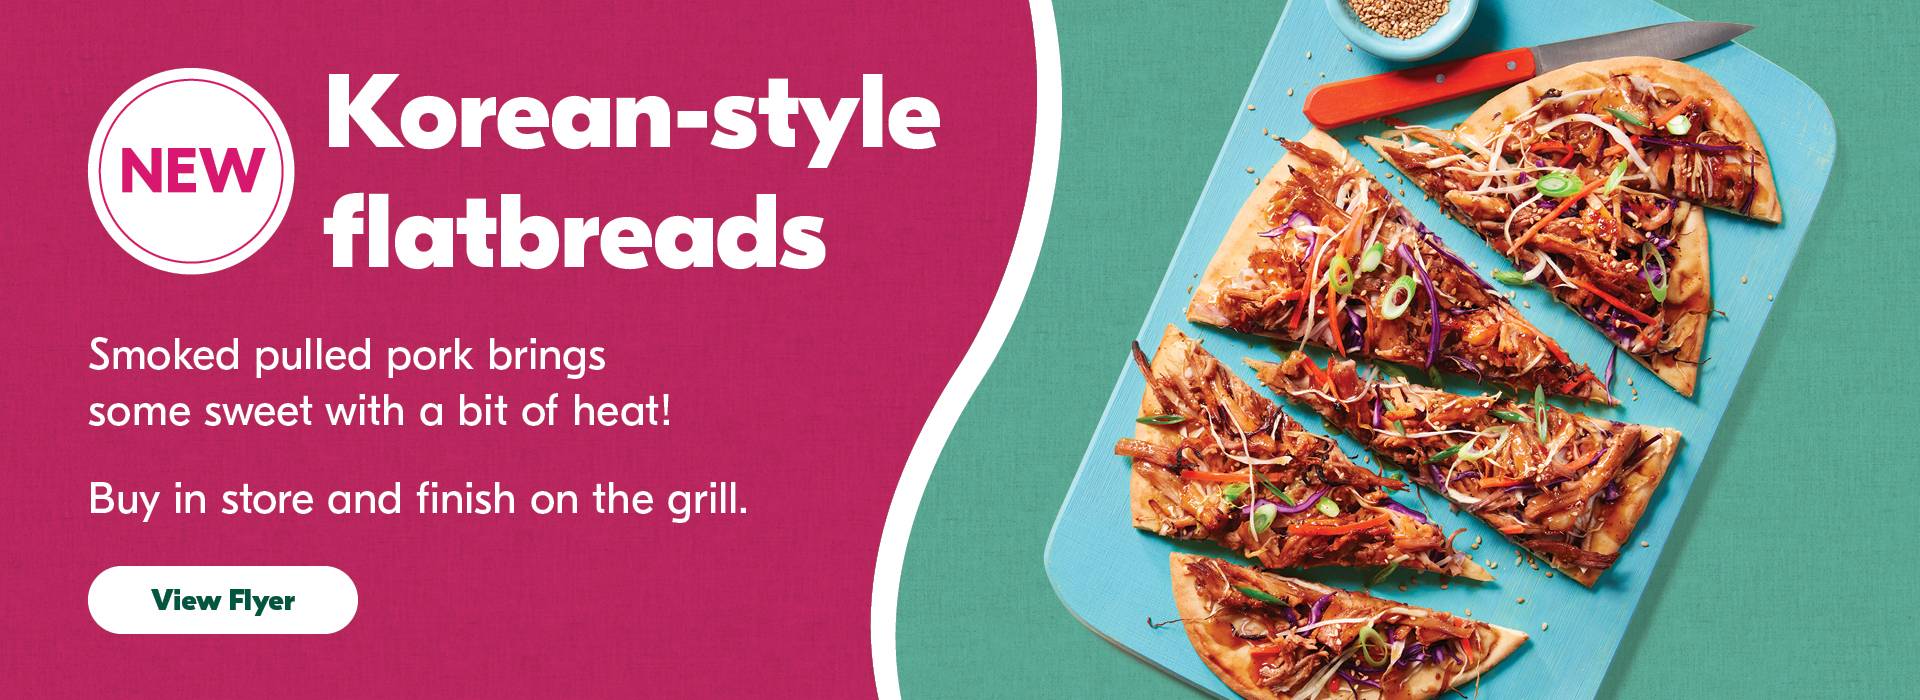 Text Reading 'New Korean-style flatbreads. Smoked pulled pork brings some sweet with a bit of heat! Buy in store and finish on the grill. 'View Flyer' button for more information'